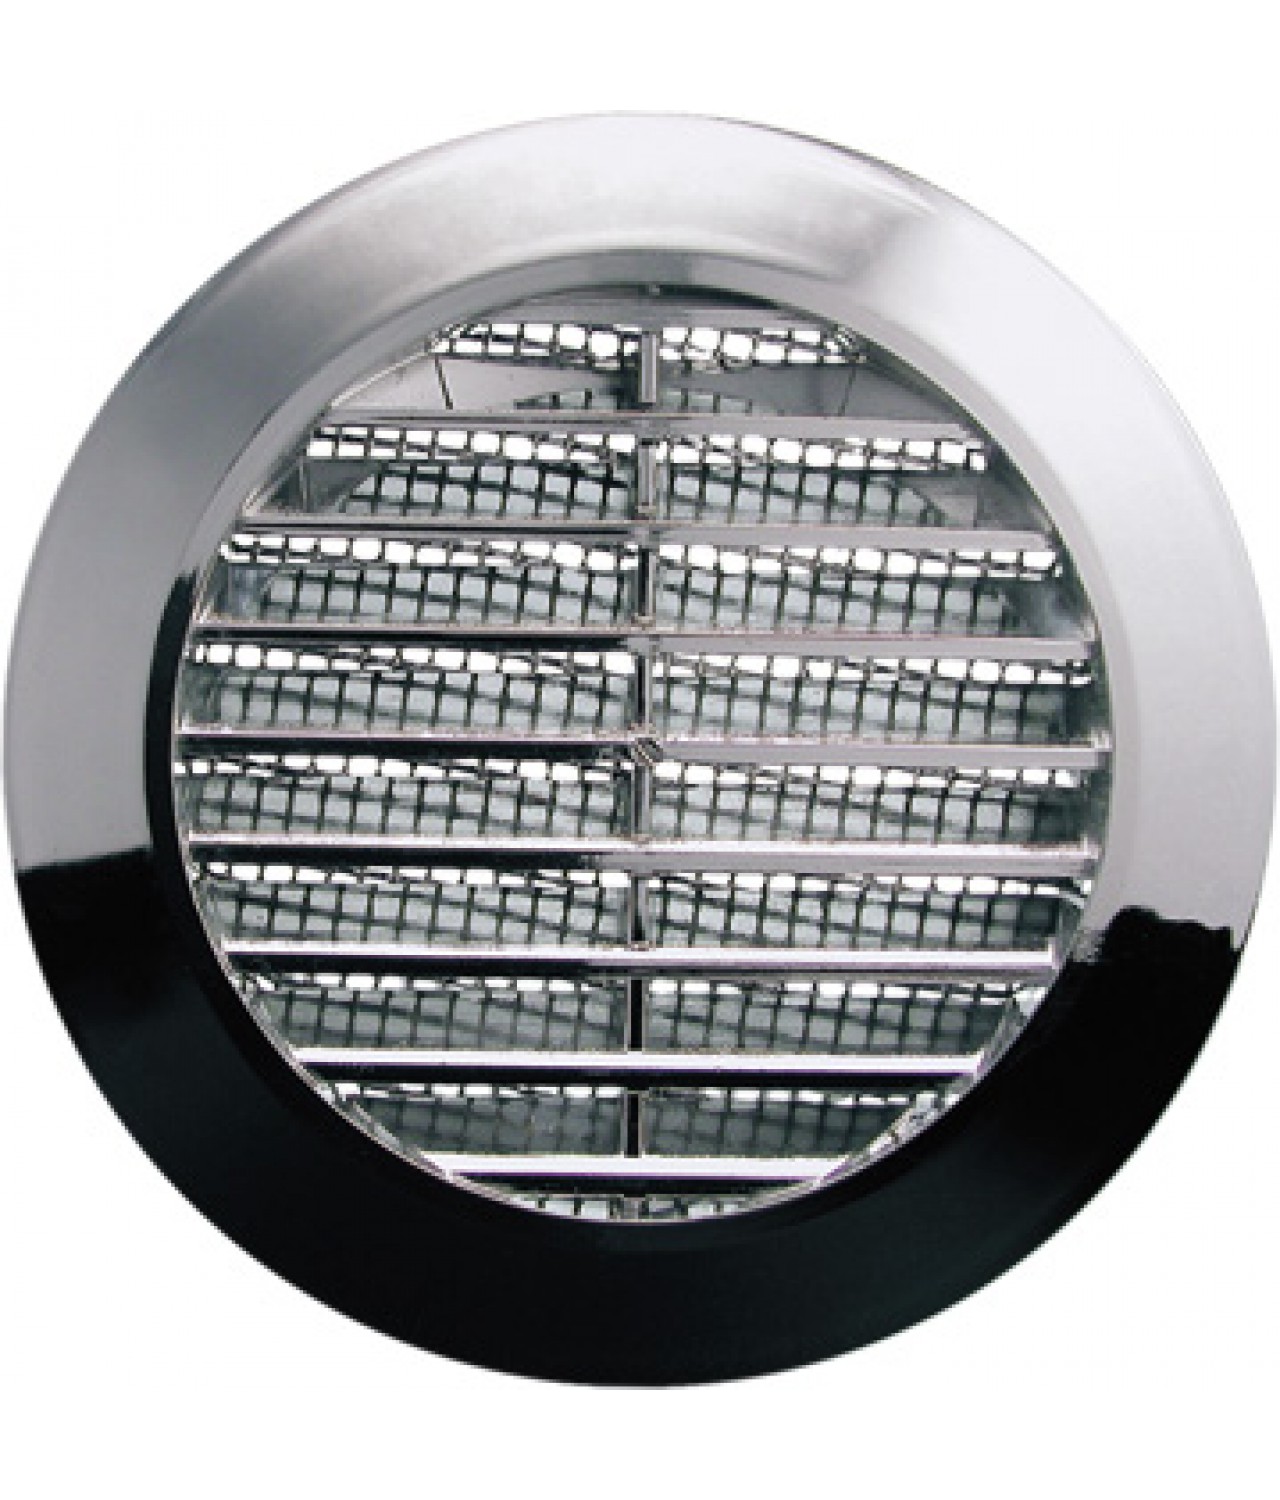 Air vent cover GRT75, Ø70/95 mm - metalized silver